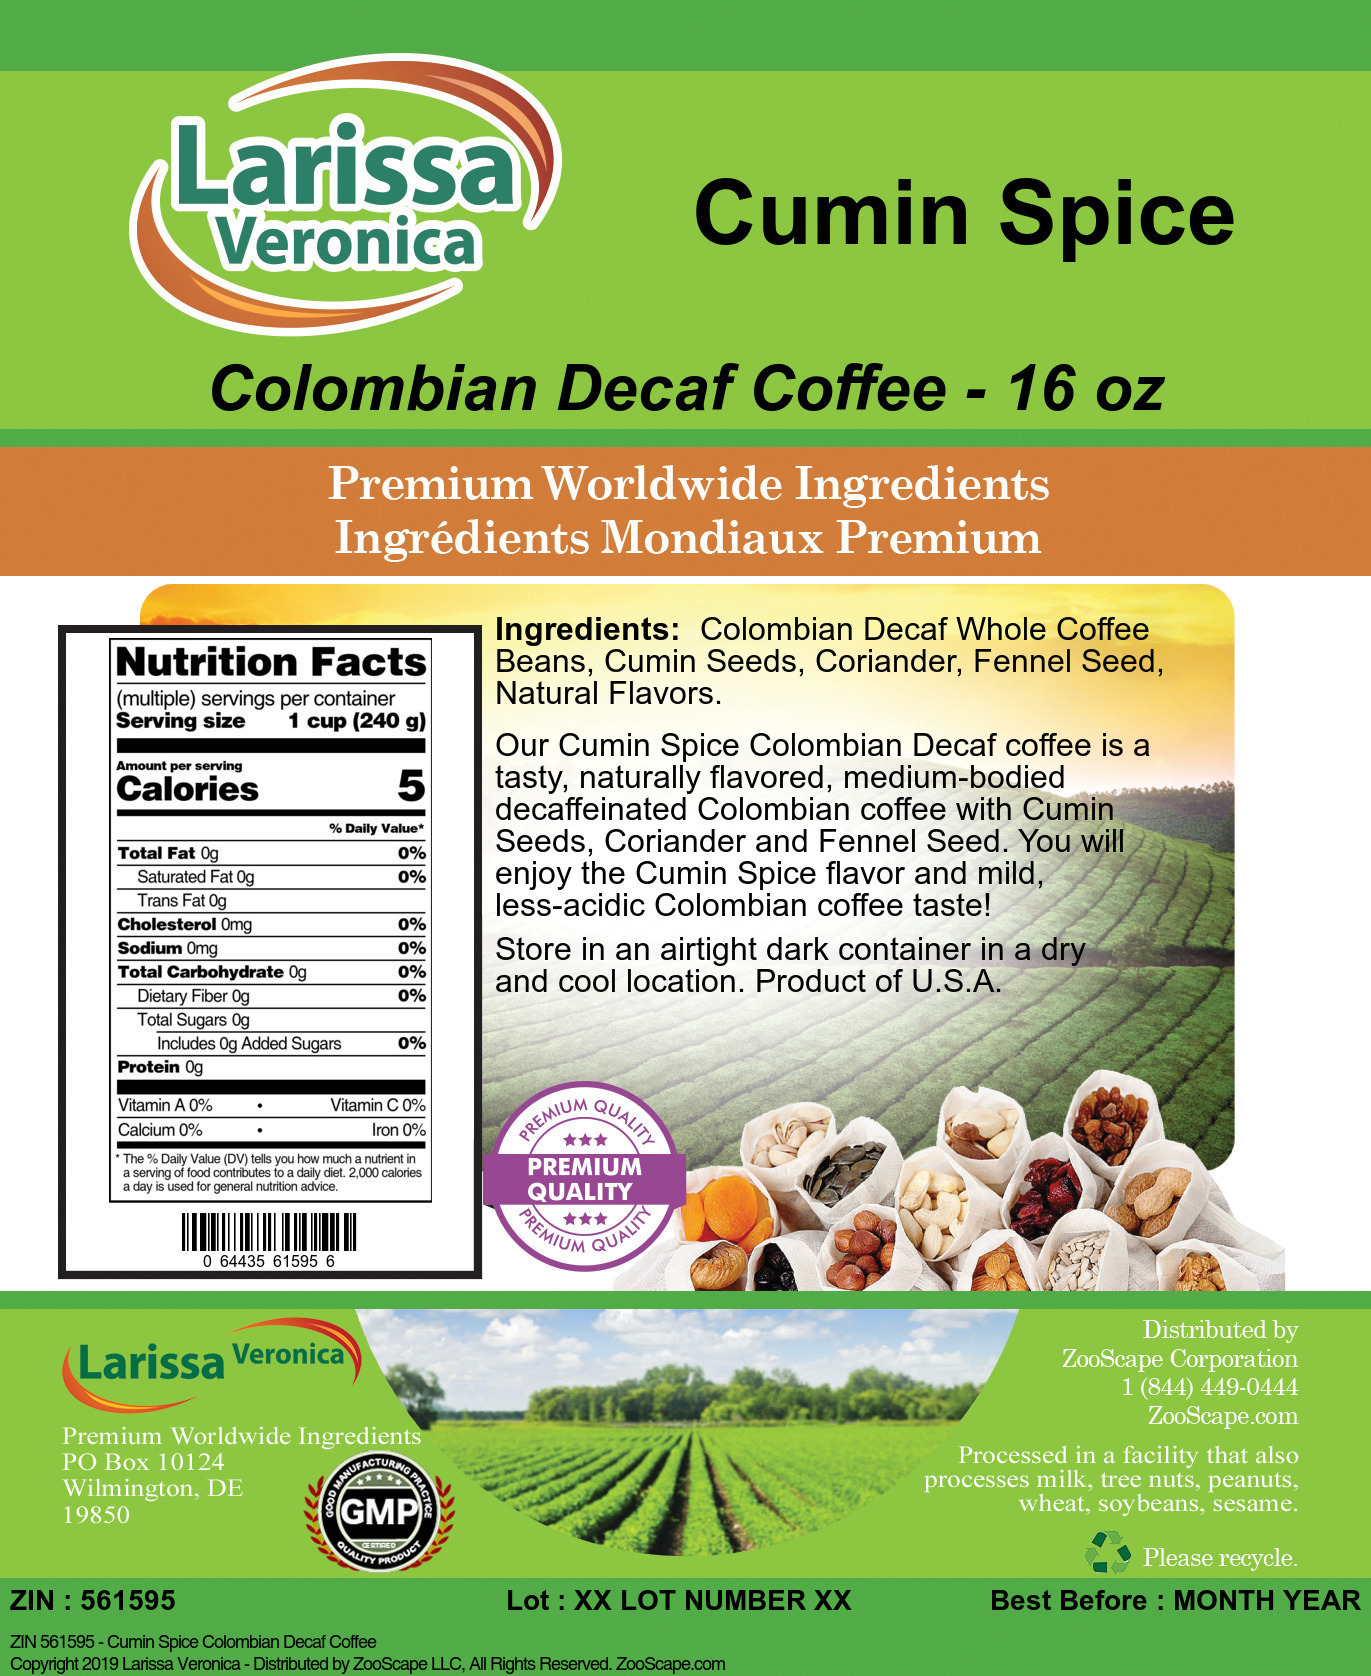 Cumin Spice Colombian Decaf Coffee - Label